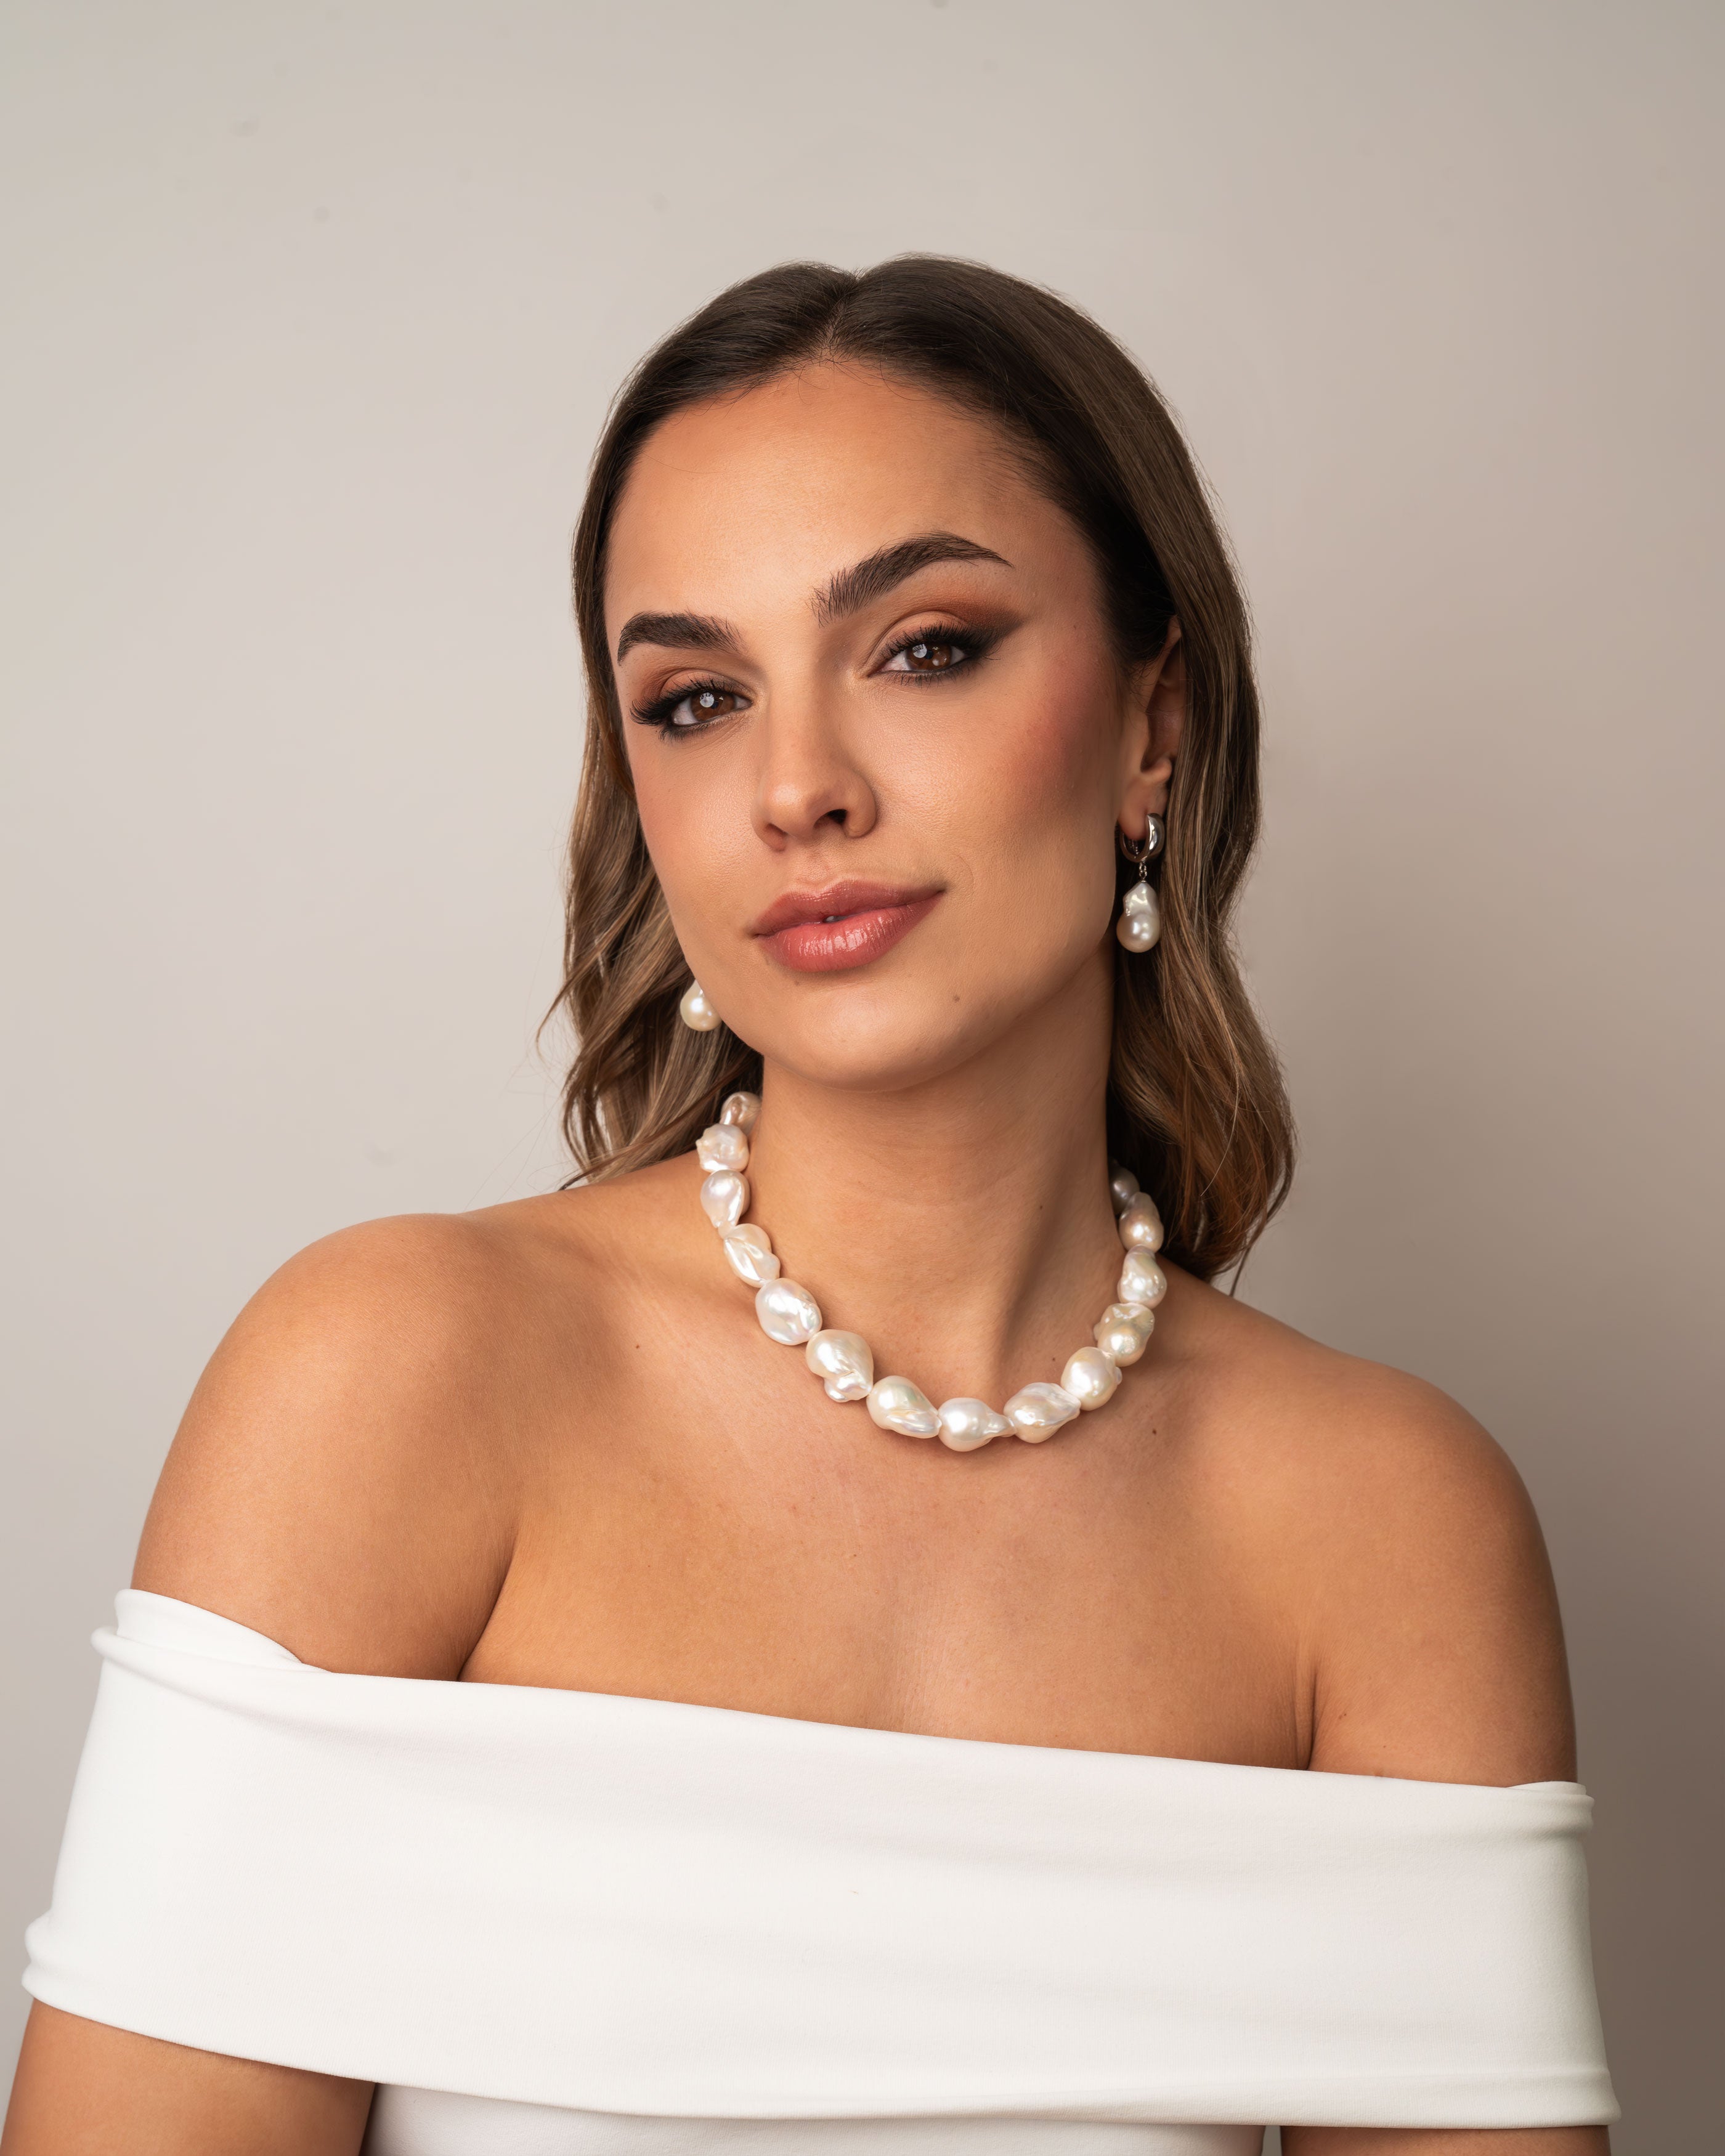 12-13mm Baroque Freshwater Pearl Necklace, 42cm.